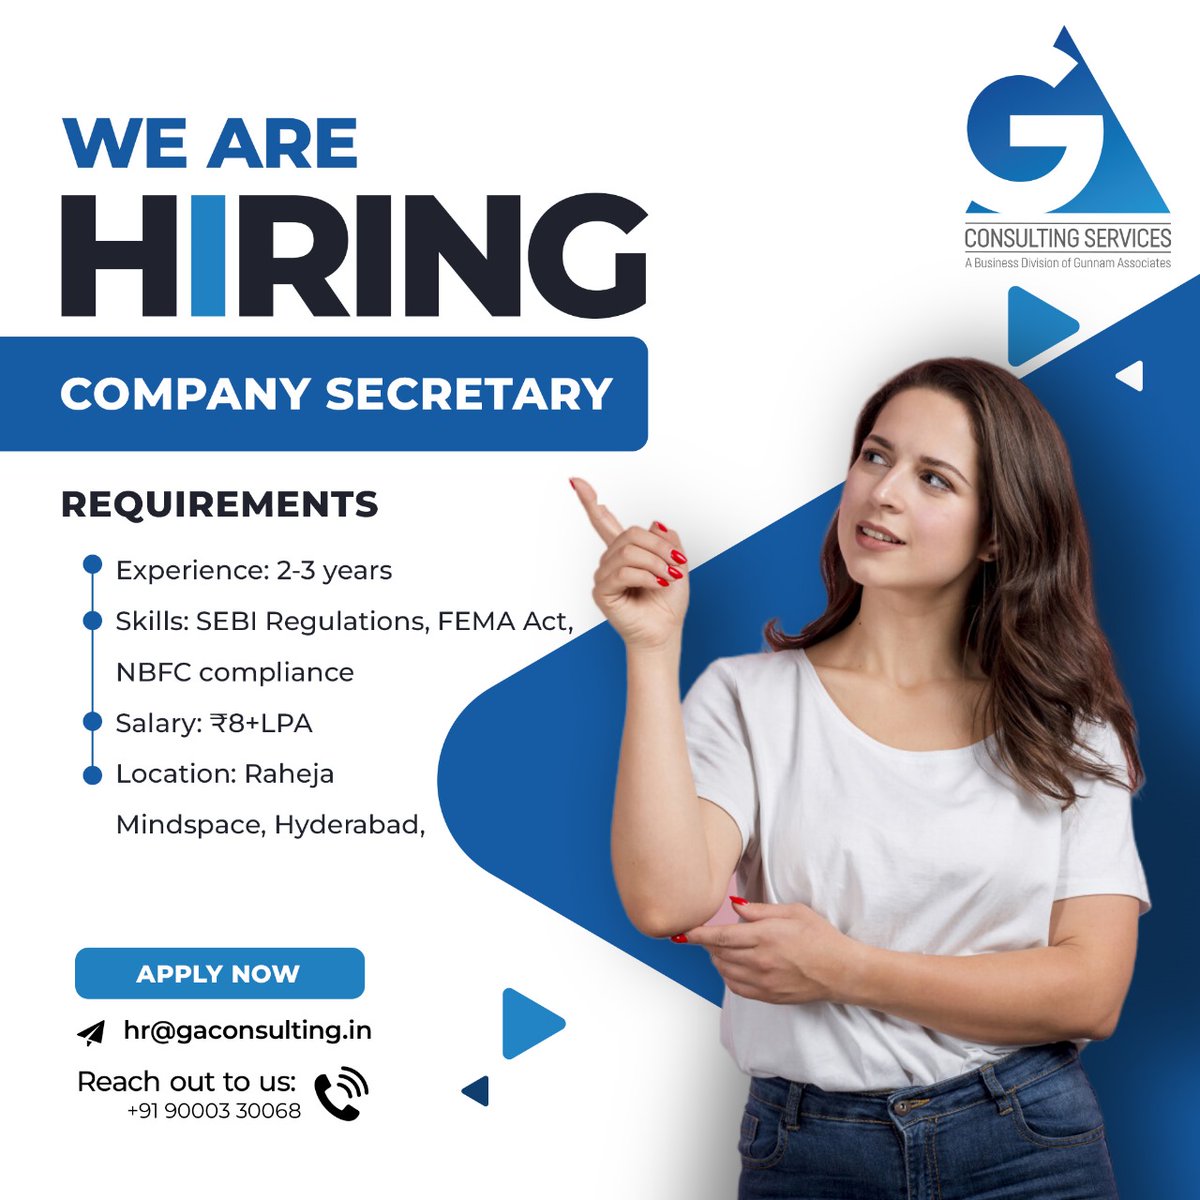 GA Consulting is on the hunt for a meticulous and dedicated Company Secretary to join our esteemed client's team. If you have a keen eye for detail and a passion for corporate governance, this role is for you! Apply now and take your career to new heights with GA Consulting.